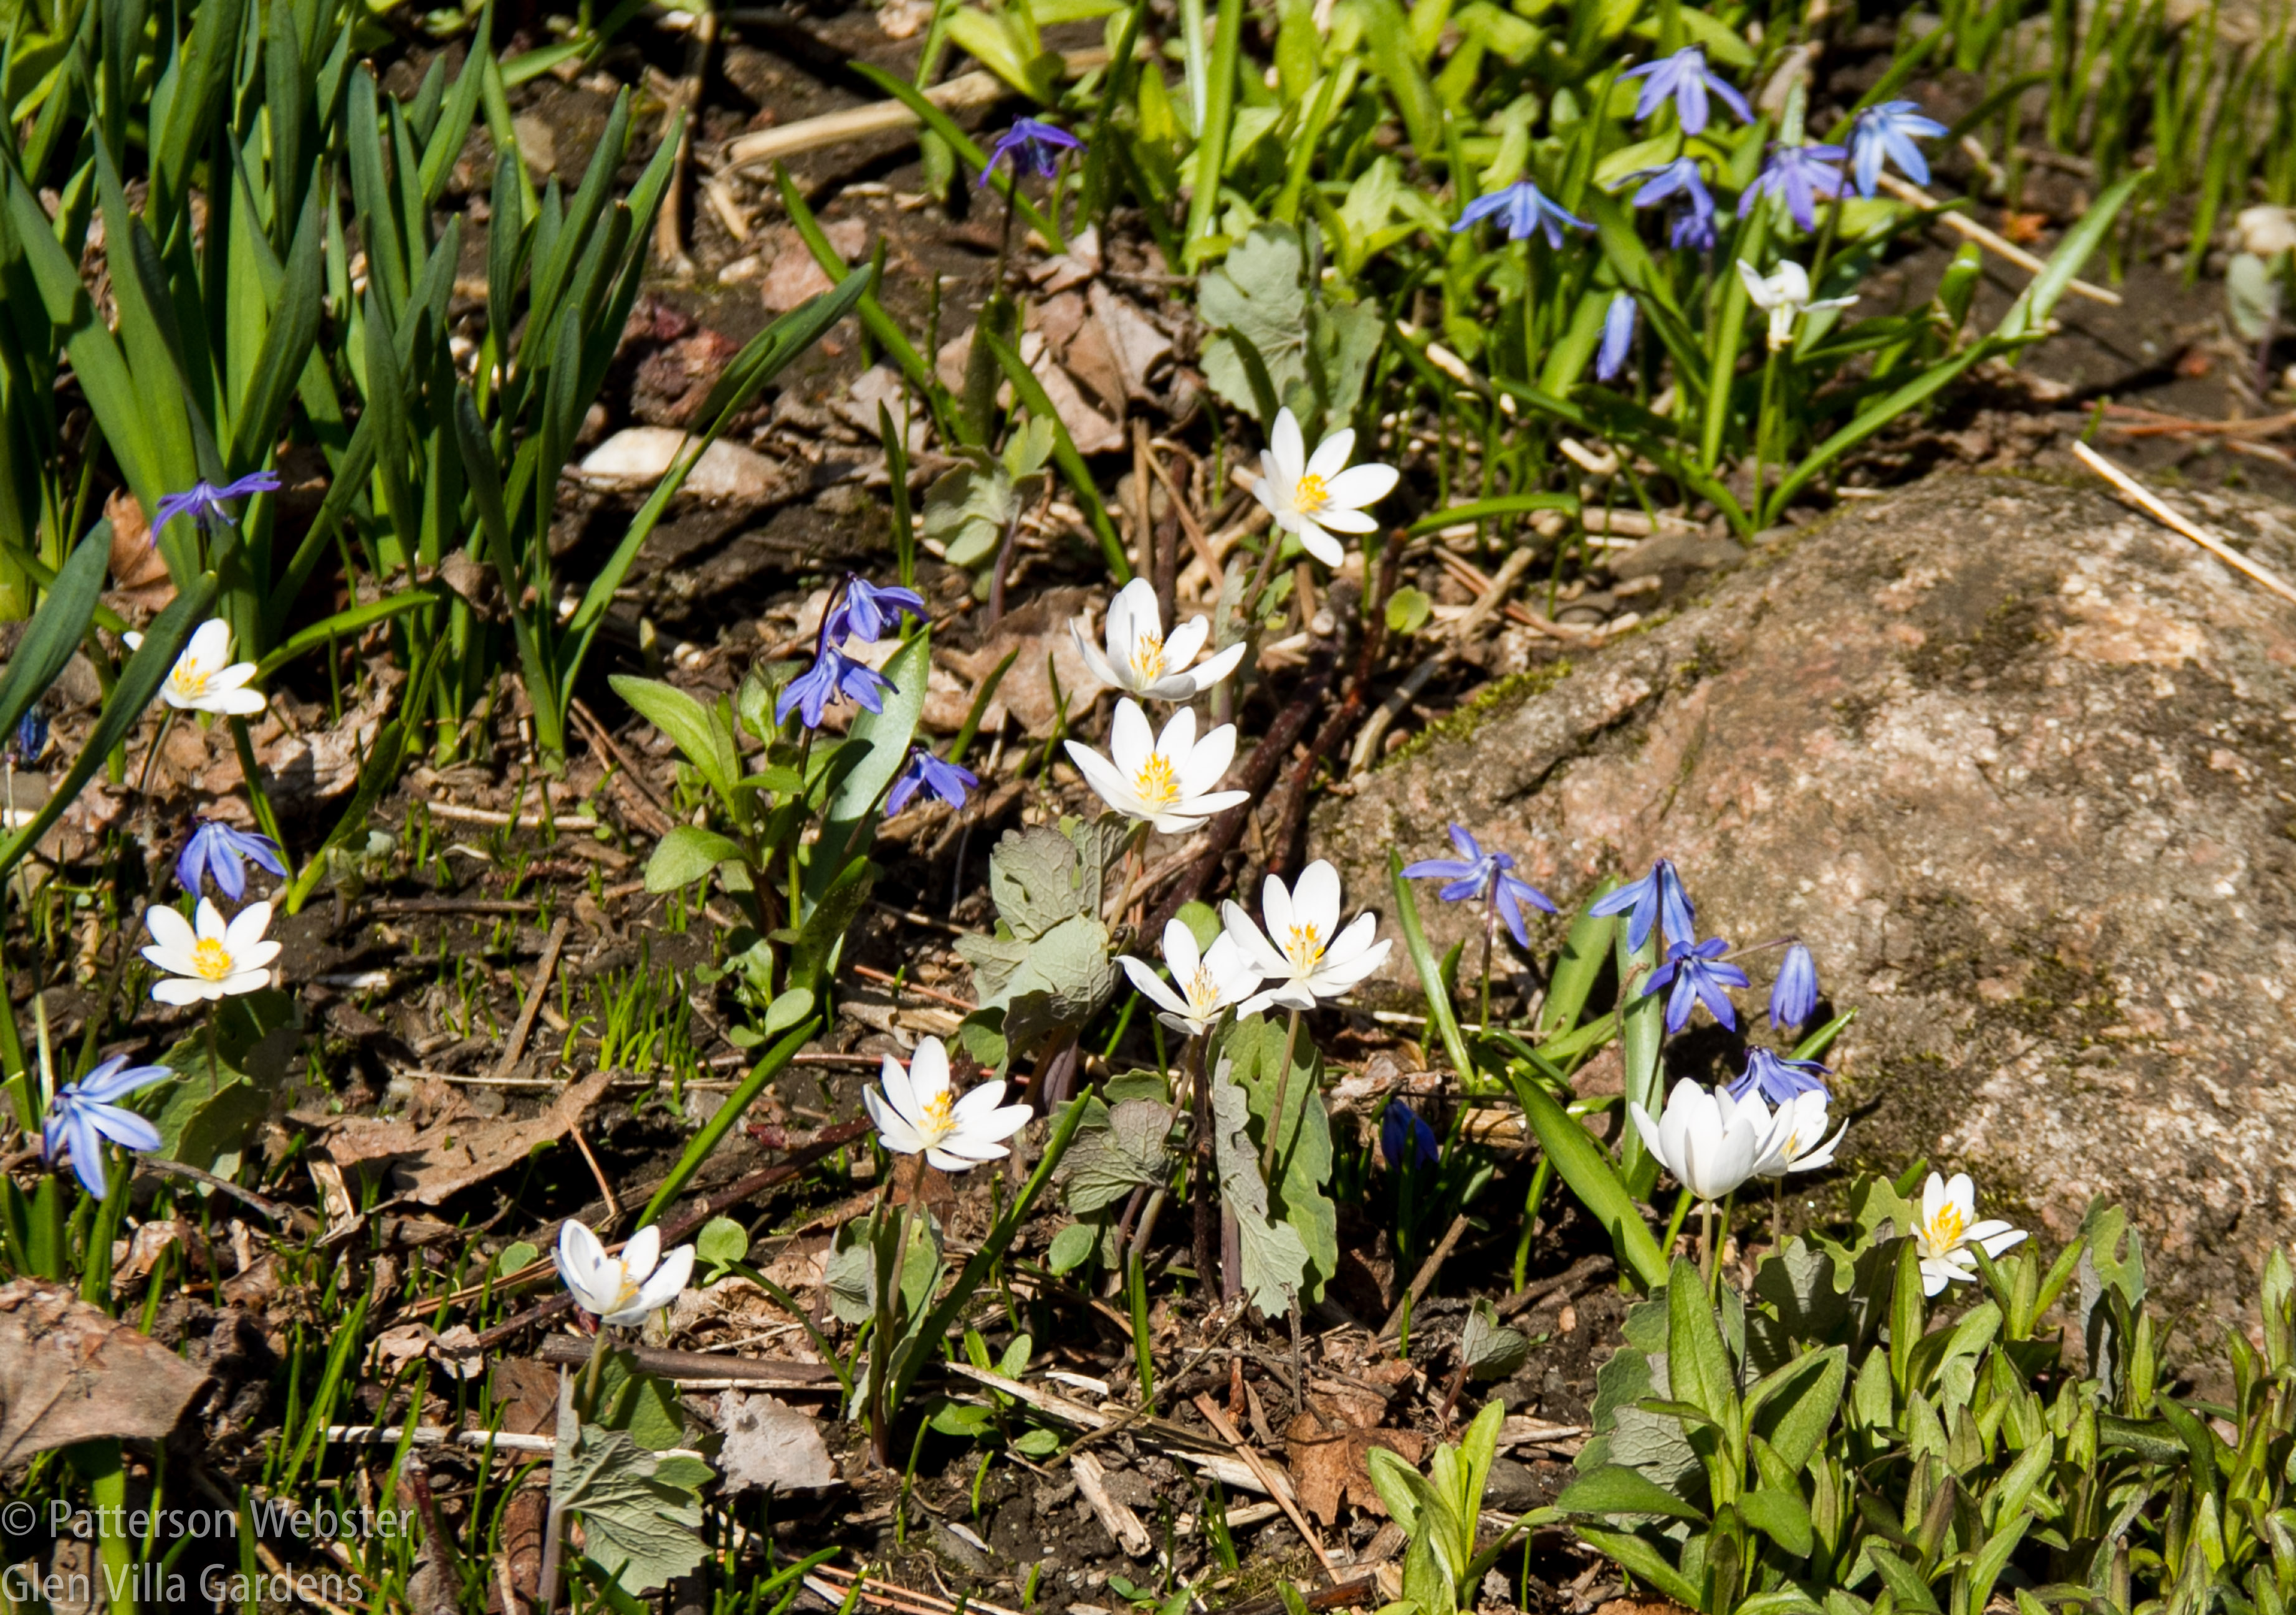 In April, this whole hillside is covered with blue and white.